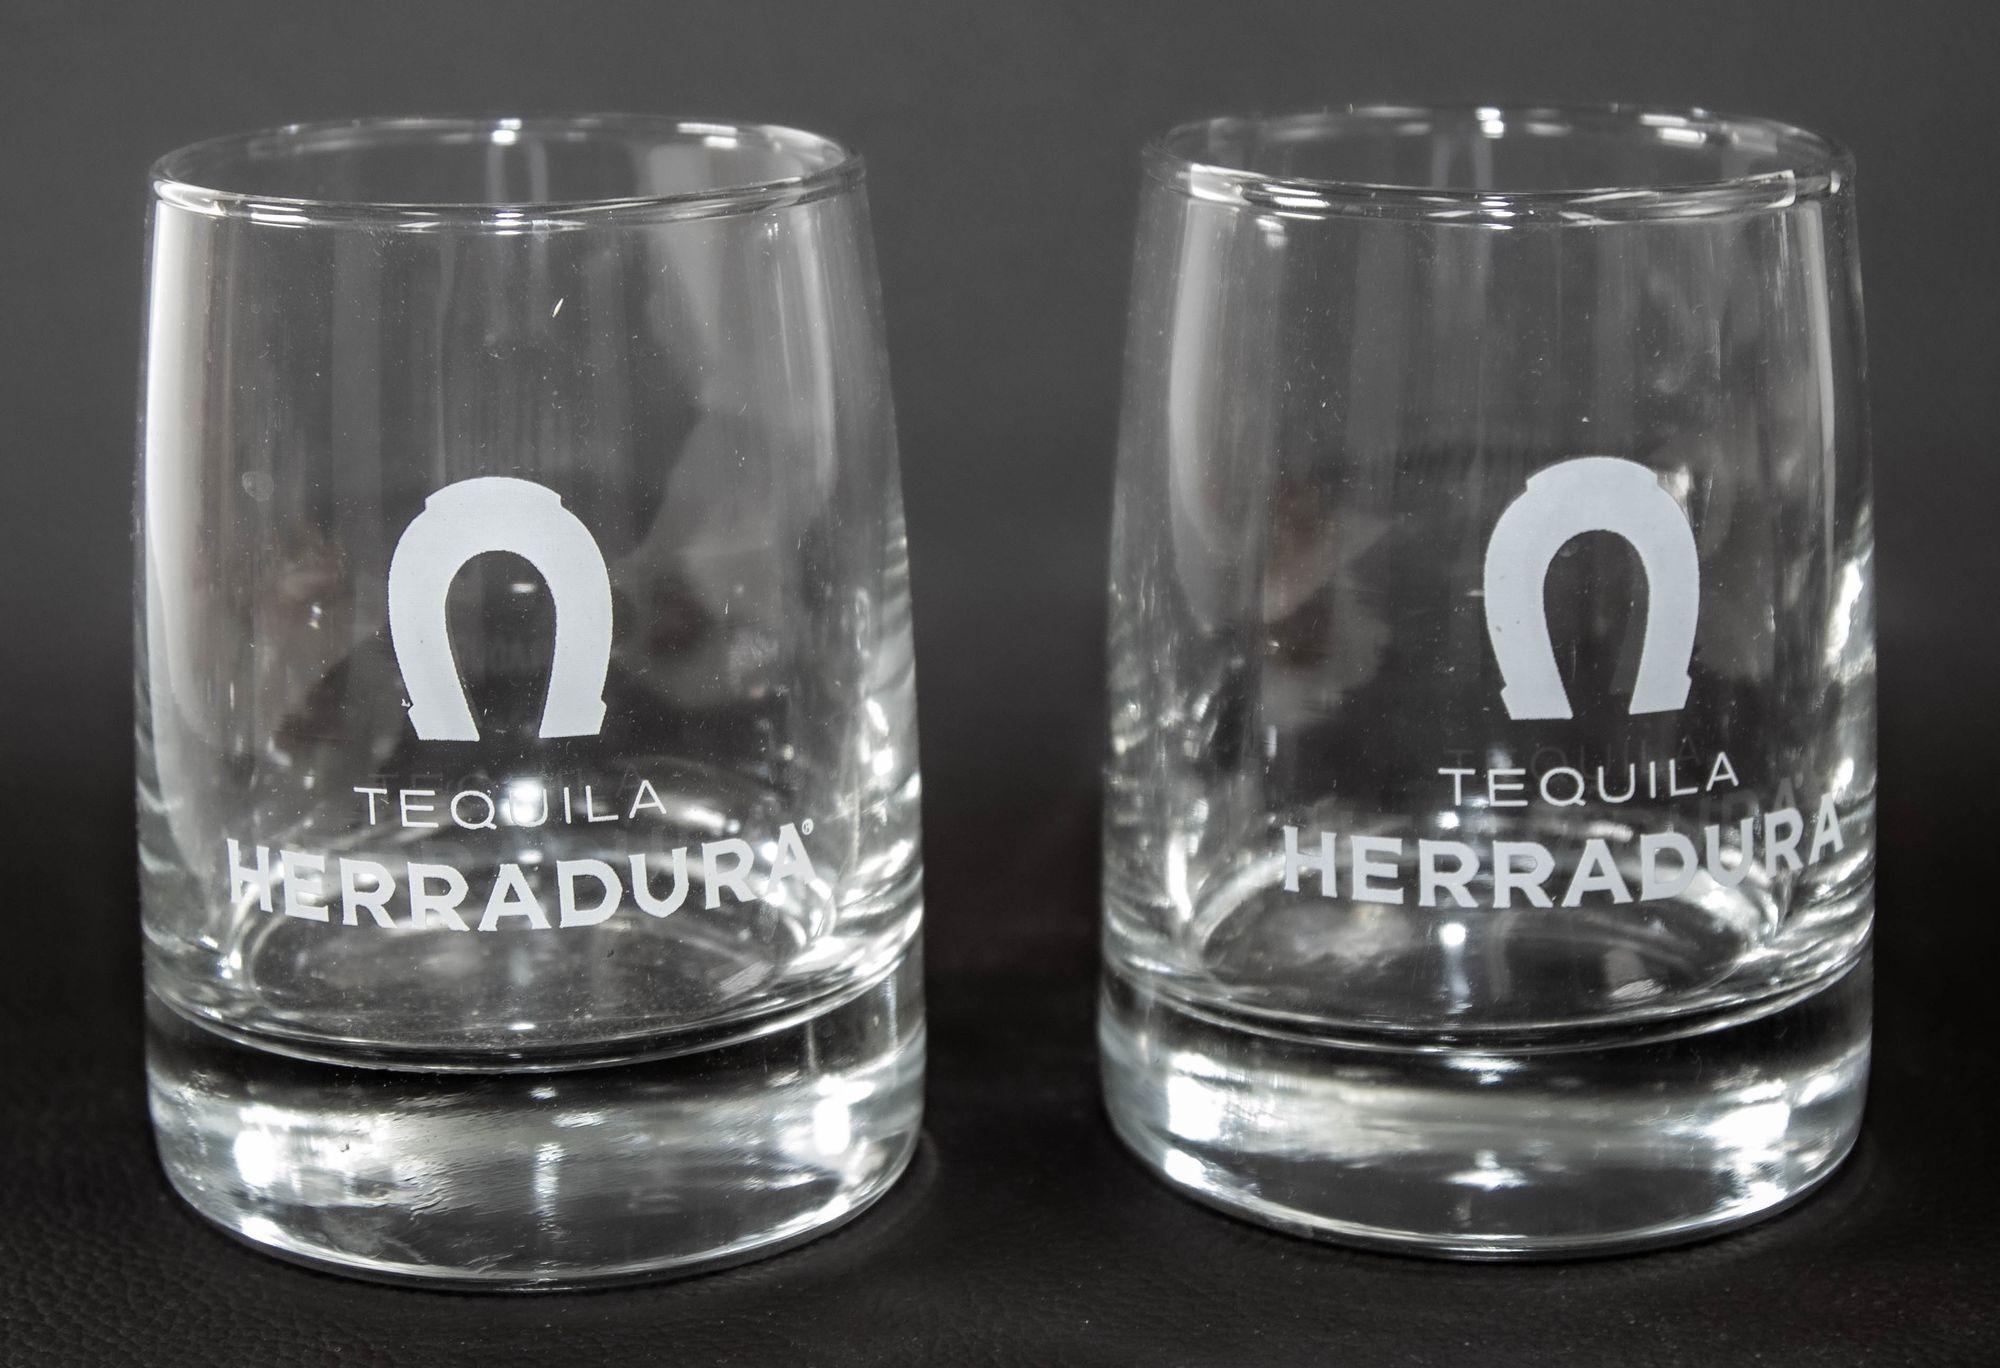 Vintage Herradura Logo Lowball tumblers Set of 4 laser engraved glasses, clear in color, with the Herradura Tequila and horseshoe logo engraved in frosted white.
Set of 4 clear low ball glasses designed for Tequila Herradura.
The glasses have a